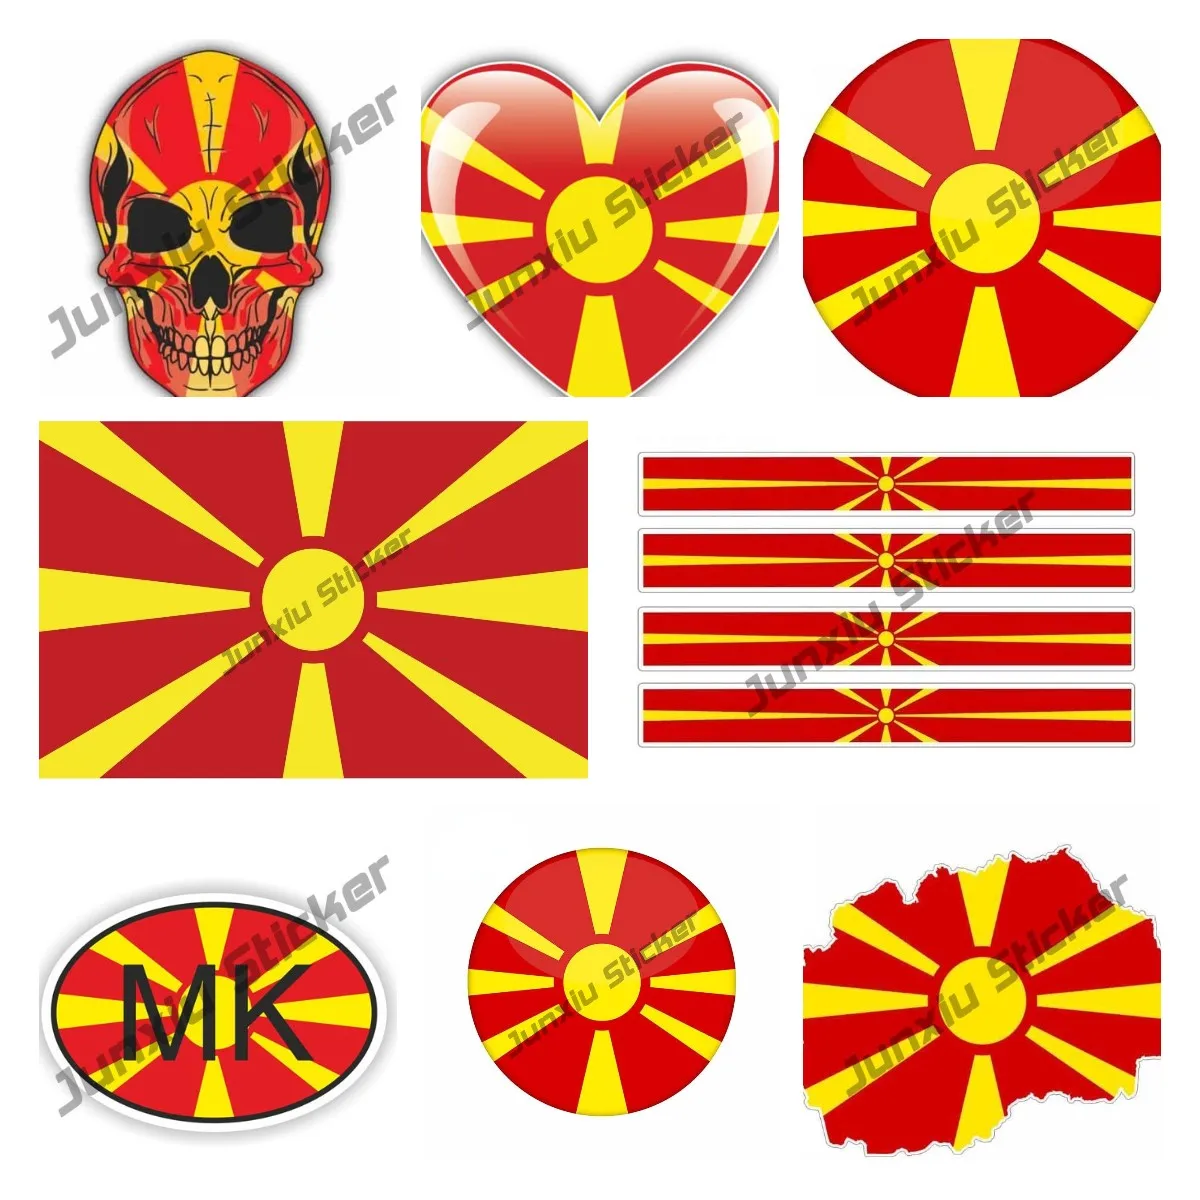 North Macedonia Stickers North Macedonia Flag Map Decal Styling Reflecitve Sticker Funny MK Code Decal Car Accessories KK13cm